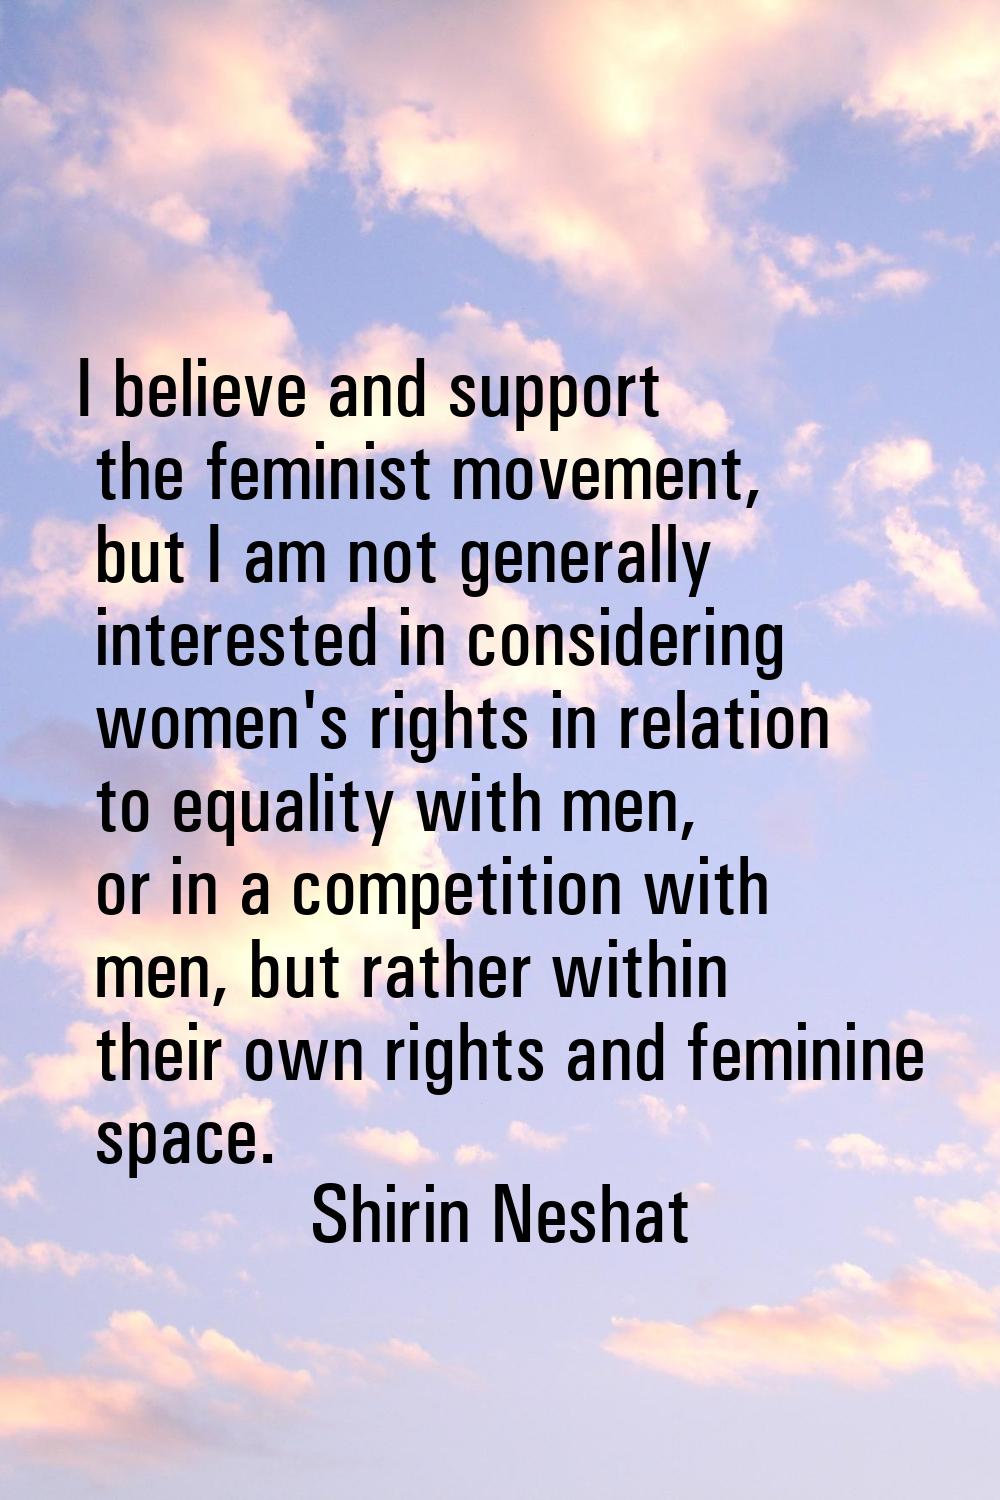 I believe and support the feminist movement, but I am not generally interested in considering women